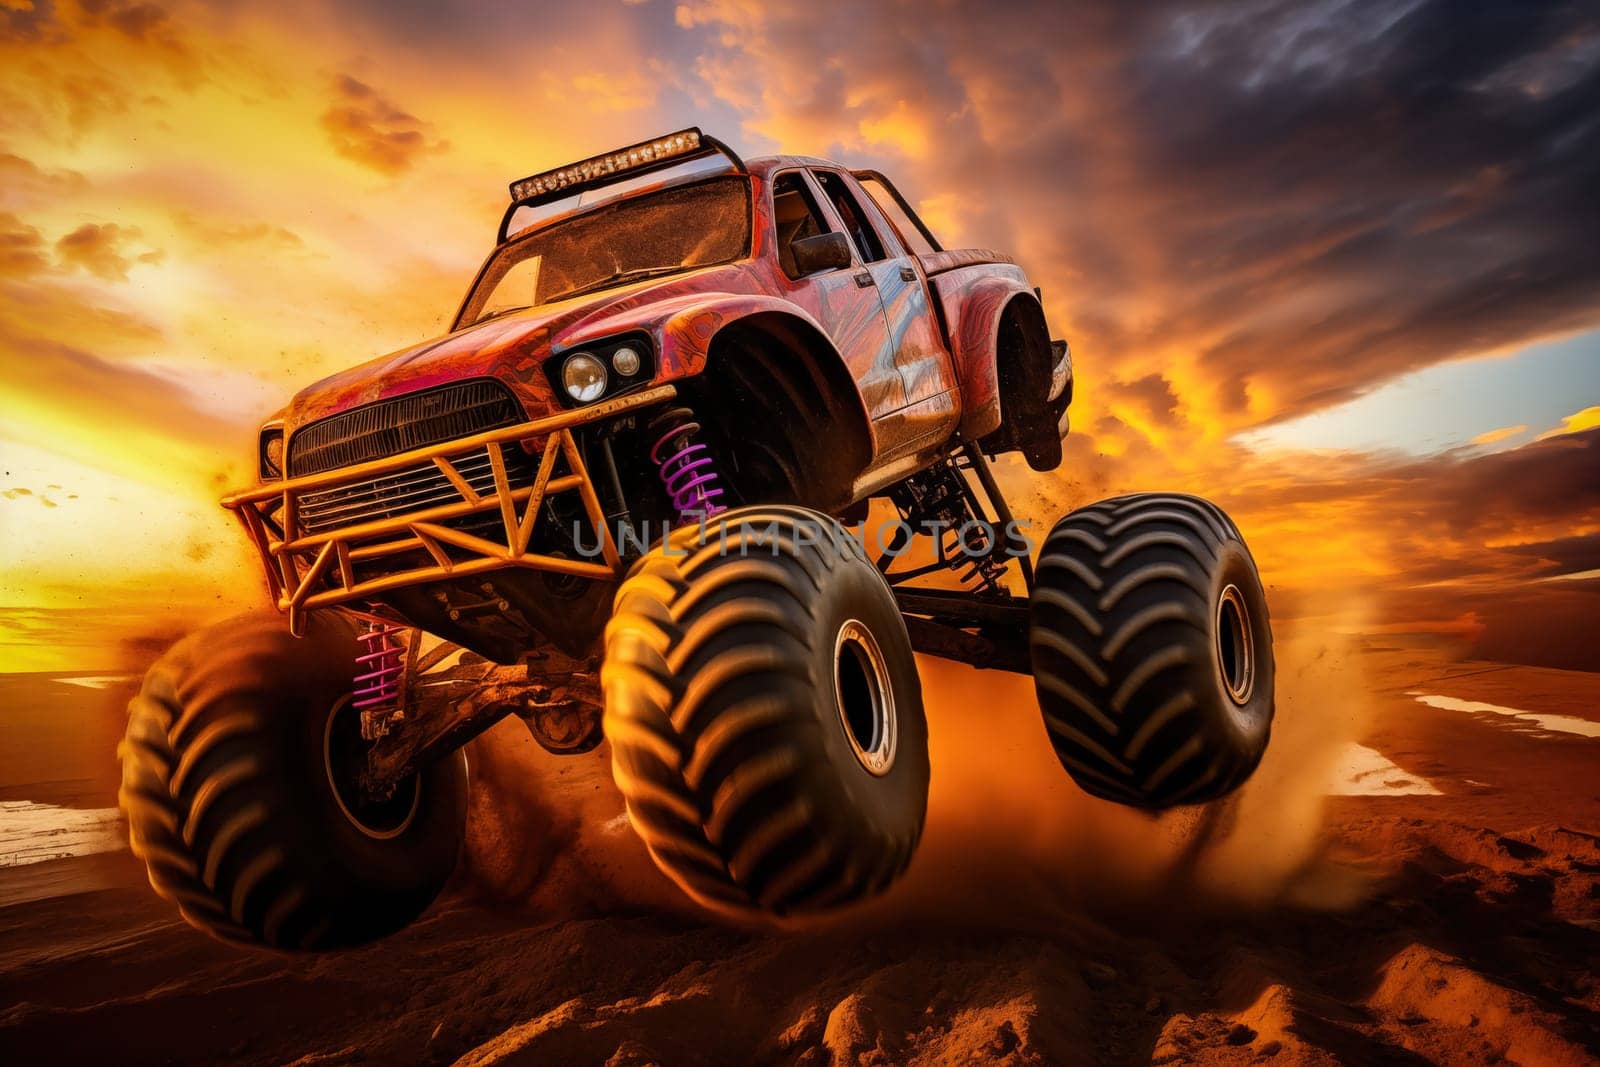 Monster truck driving and jumping outdoors amidst a cloud of dust. Thrill and adrenaline of an outdoor racing event on off-road terrain at dramatic sunset